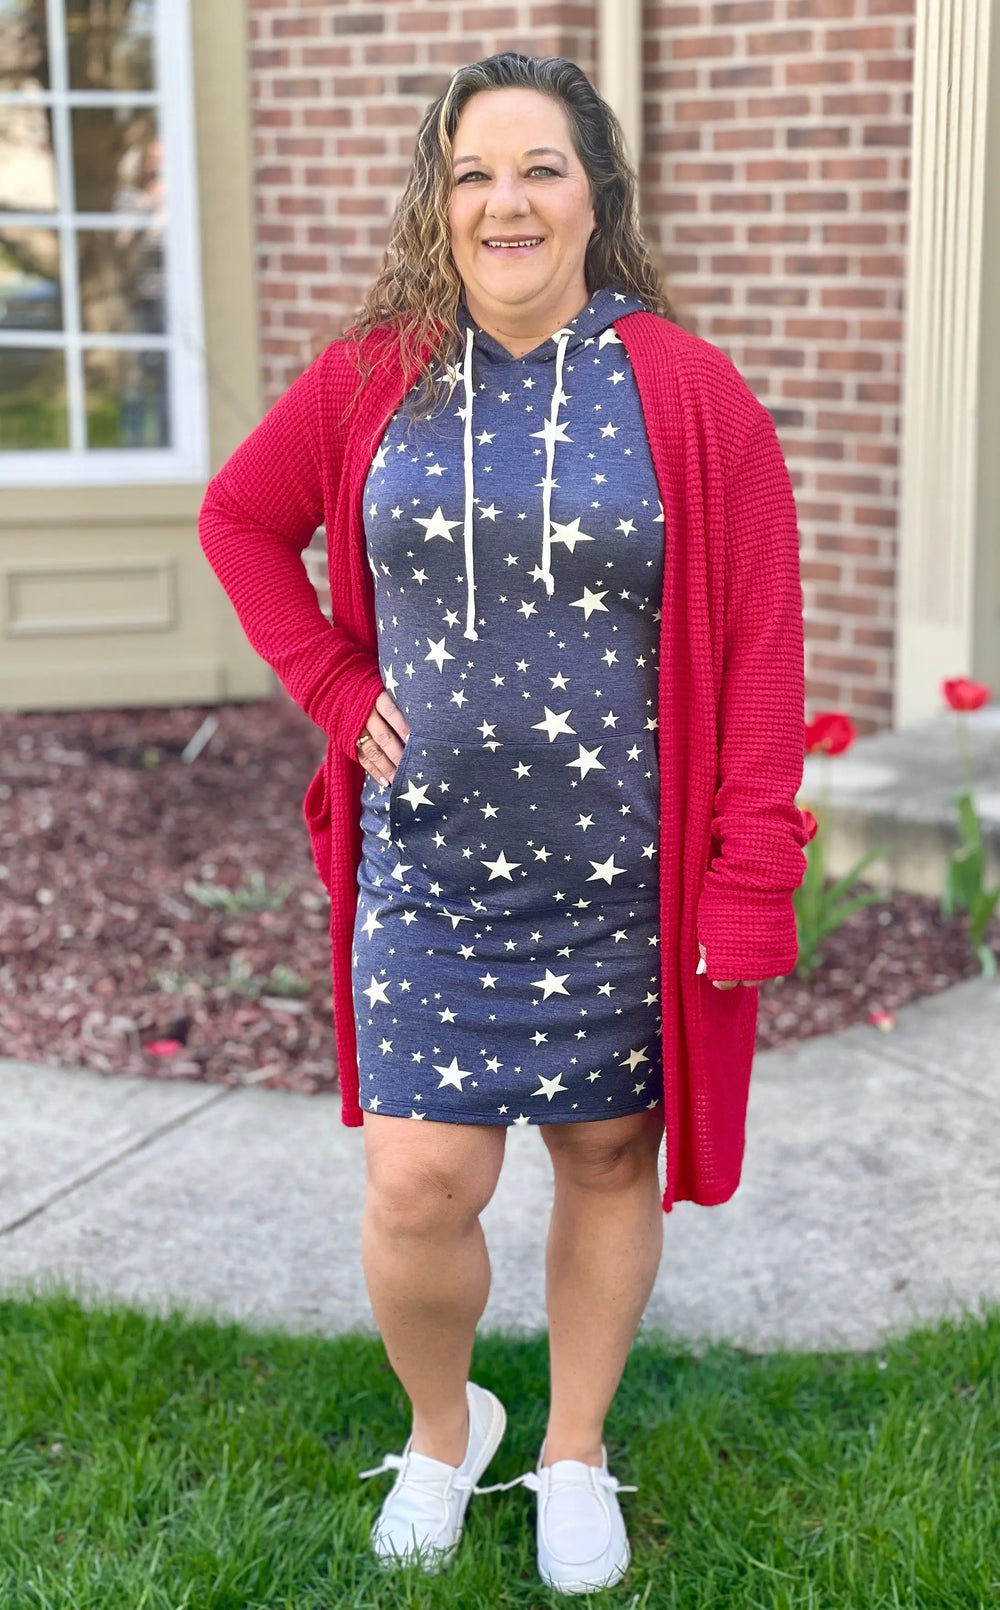 Seeing Stars Navy & White Sleeveless Dress-dress-Gee Gee-Styled by Steph-Women's Fashion Clothing Boutique, Indiana